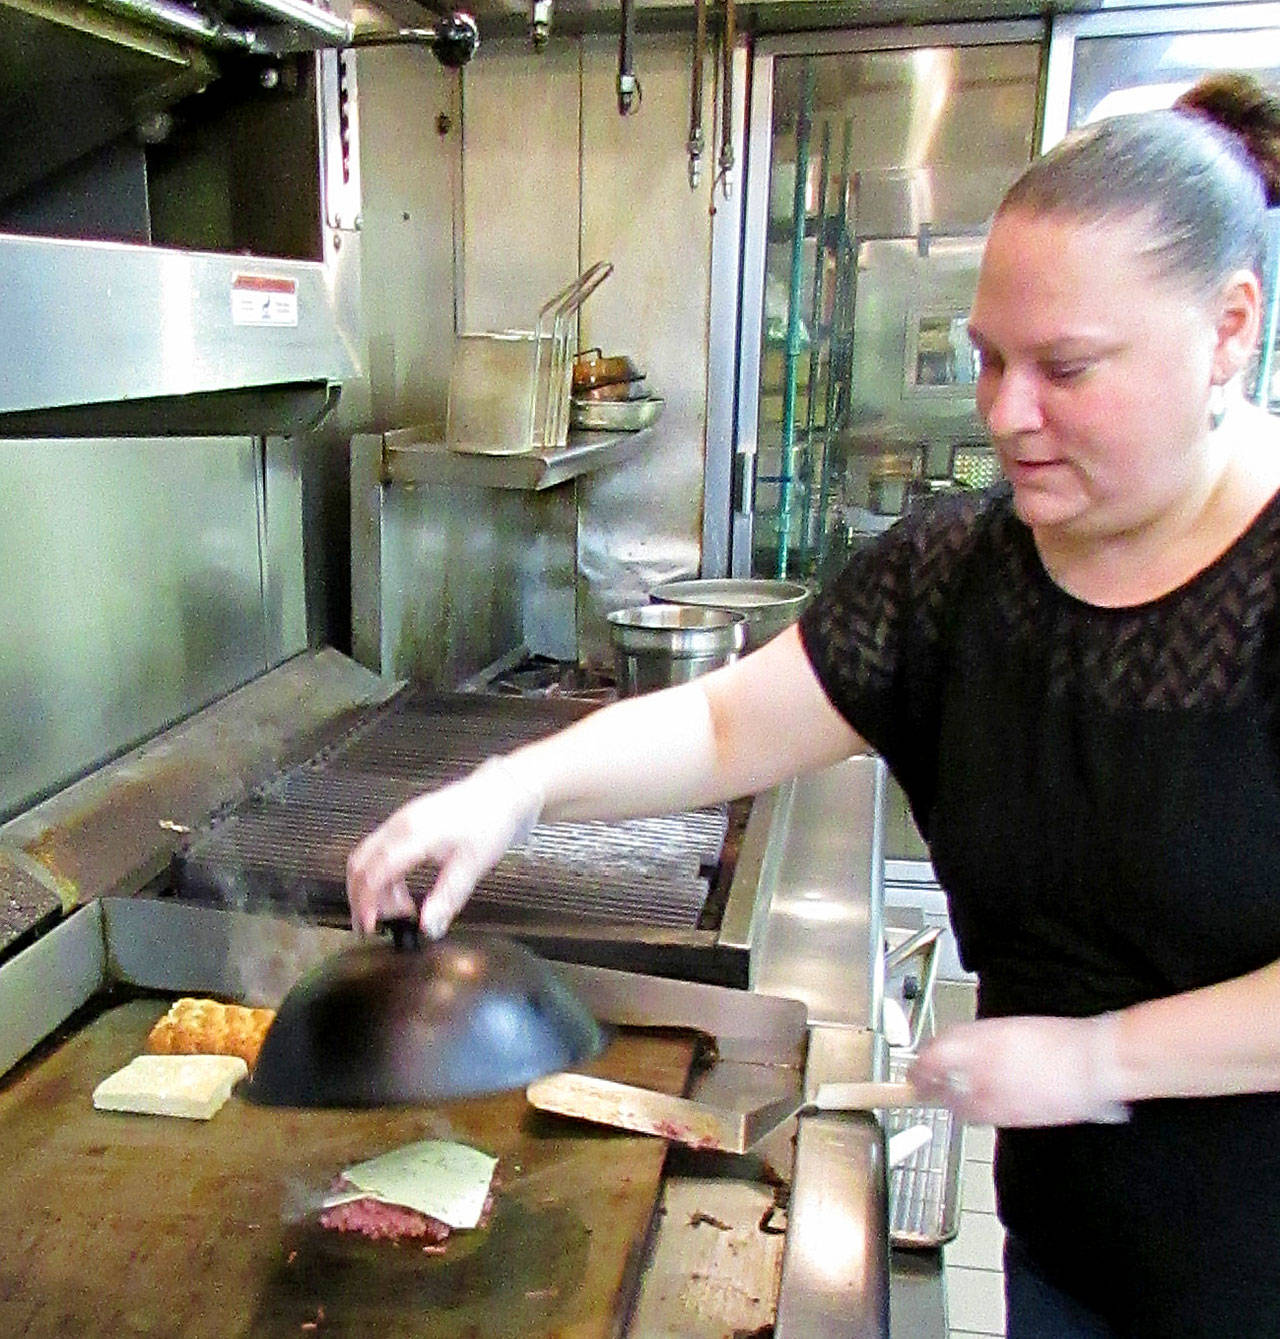 Scott D. Johnston photo: Working her culinary craft on a Reuben sandwich is Danica Thomas, chef, general manager and now owner of the Ocean Grill Ocean Shores.